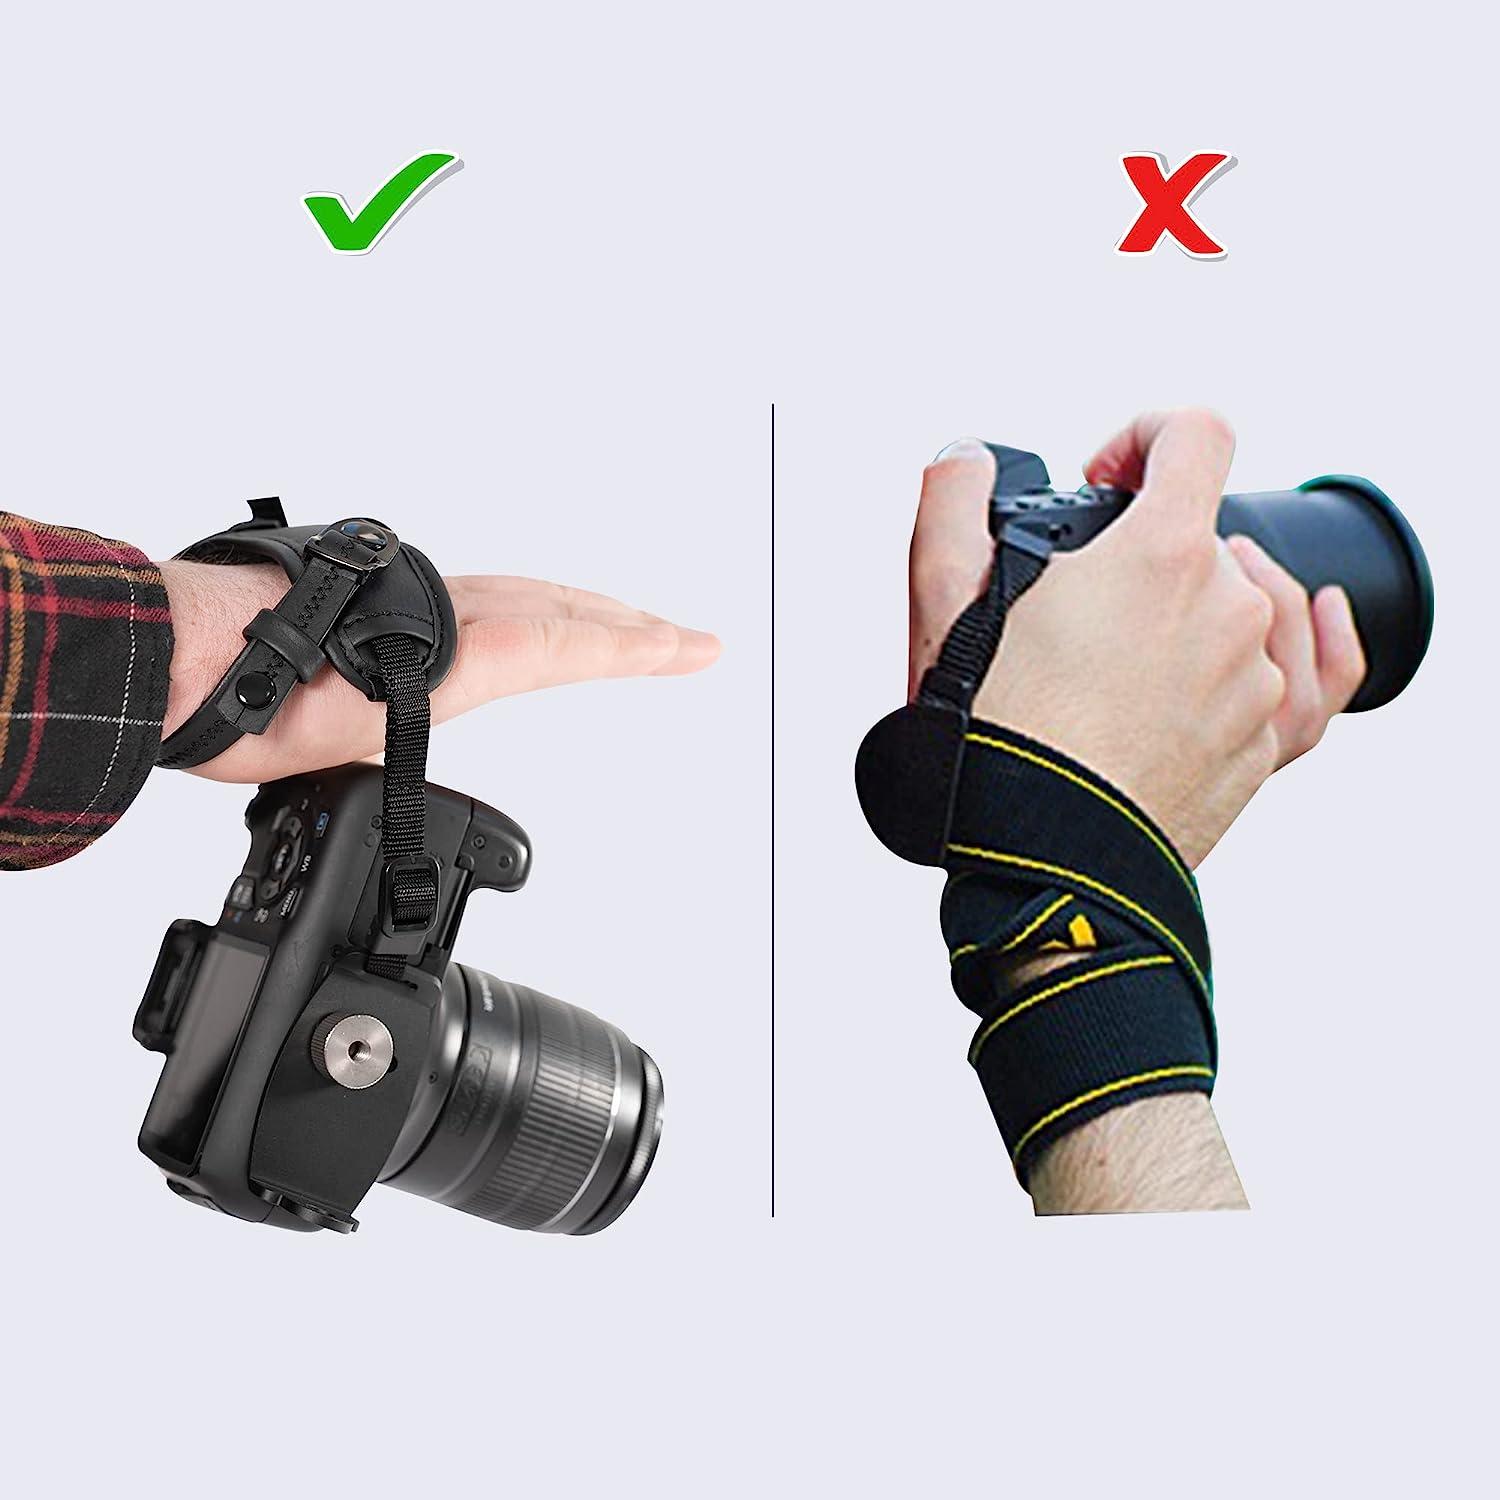 Camera Wrist Strap, Rapid Fire Secure Camera Hand Strap, Compatible with  Sony Mirrorless and DSLR Cameras, Black Wrist Grip Camera Straps, Camera  Wrist Straps for Photographers Canon Camera Hand Strap